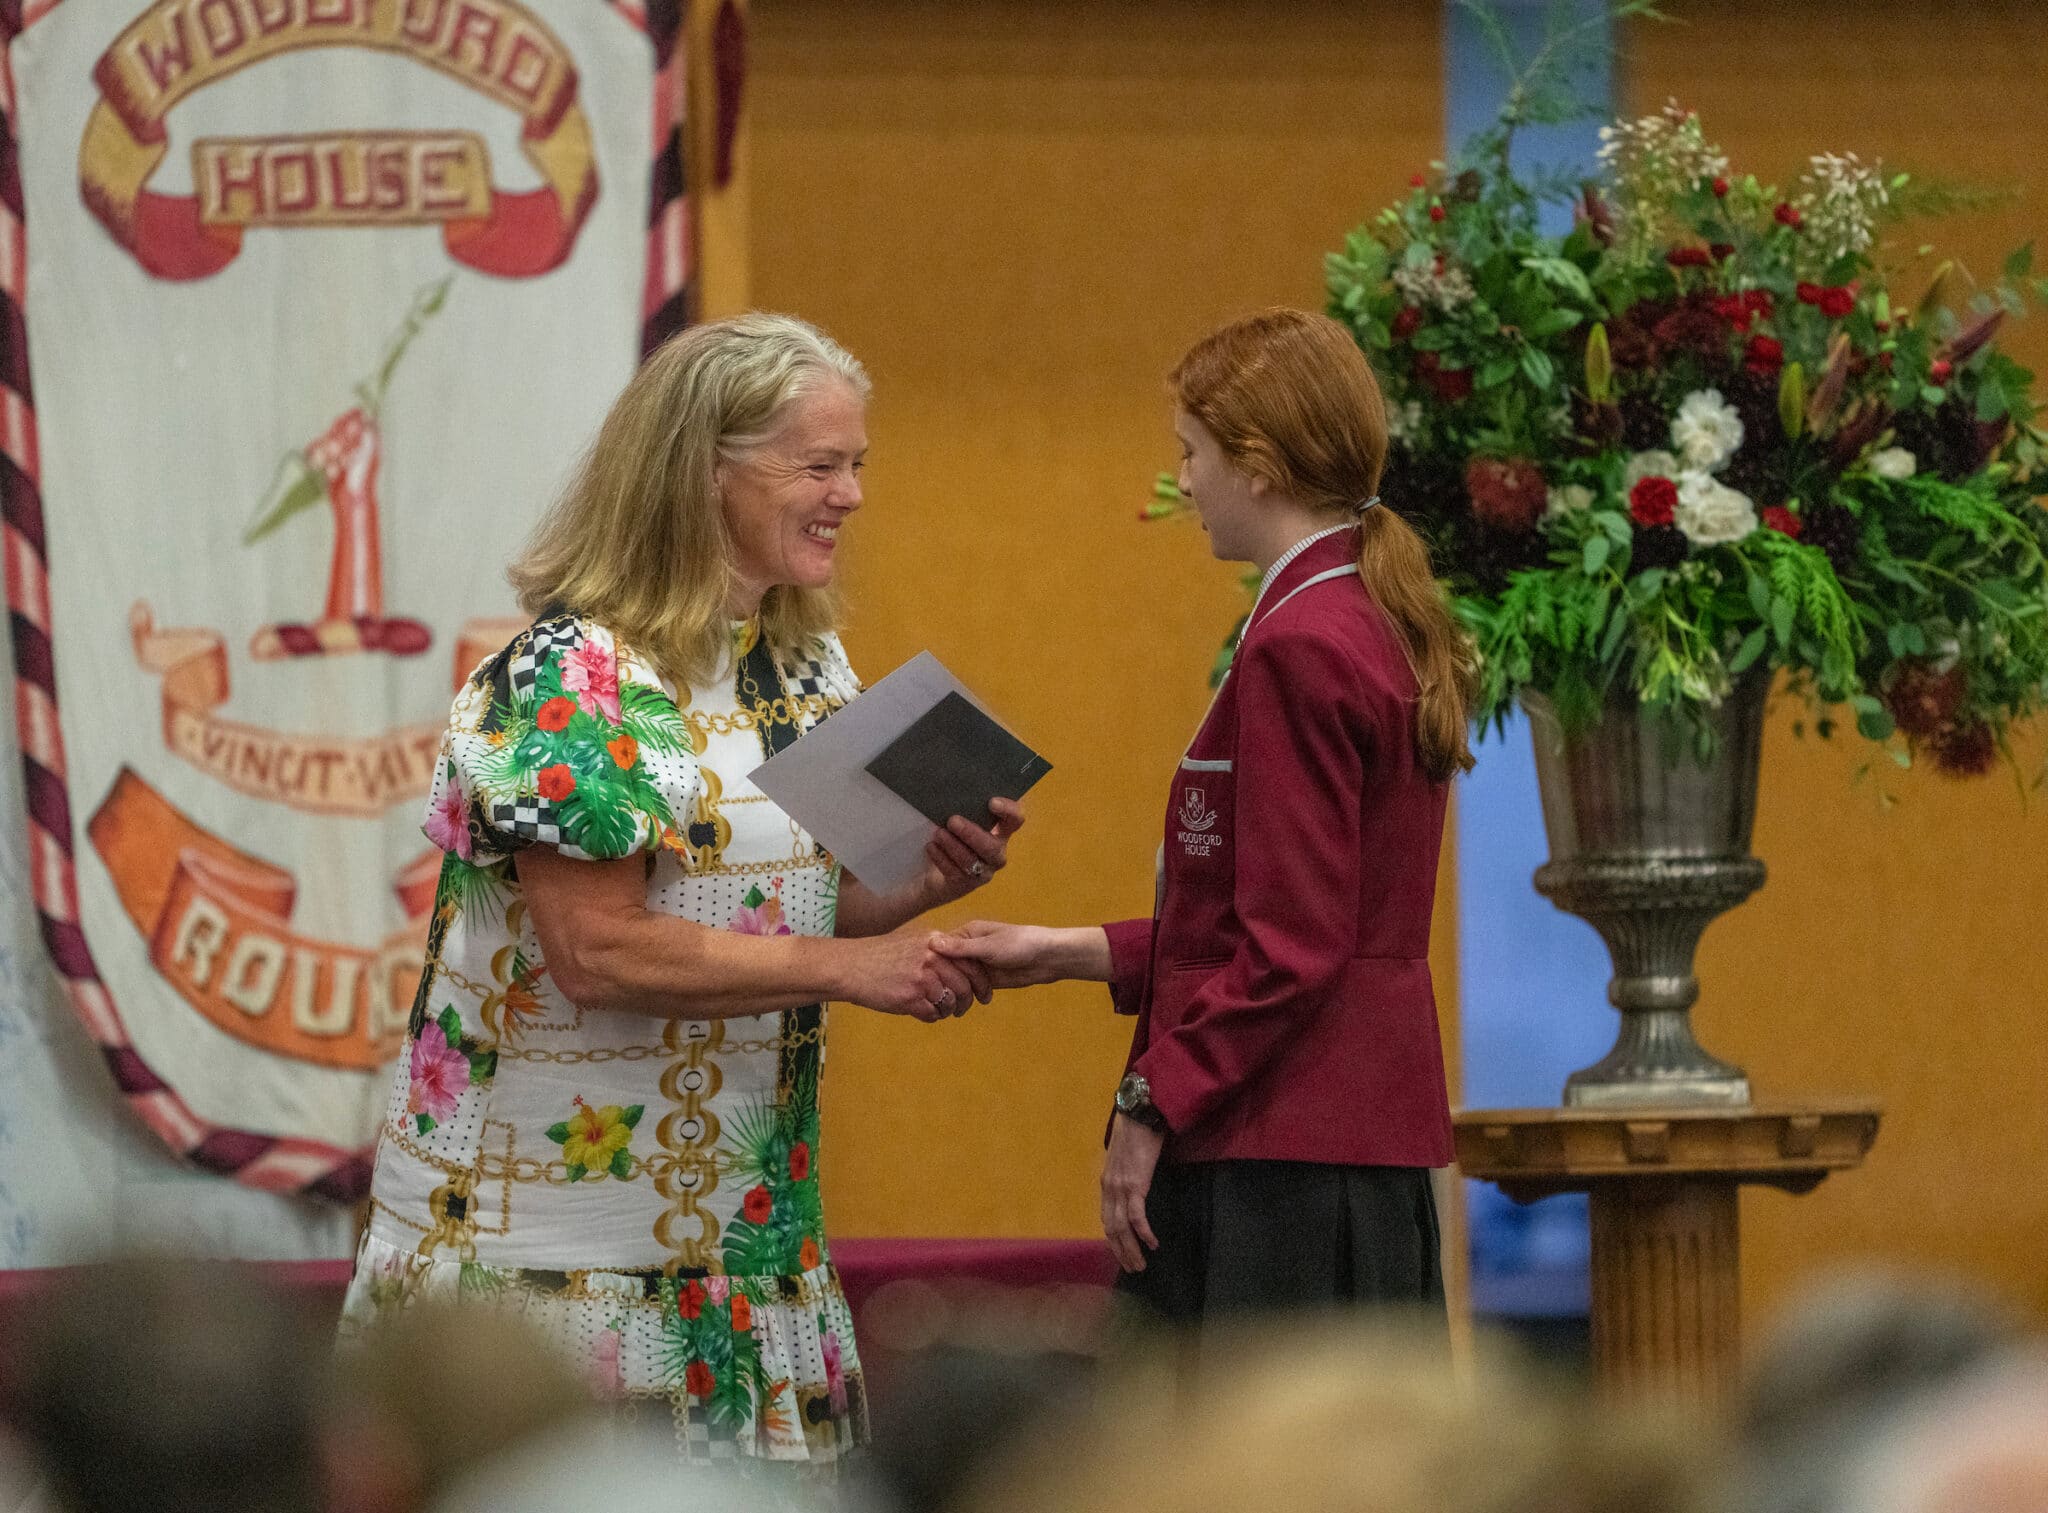 WOODFORD HOUSE - Junior Prize Giving, New Zealand, Wednesday, 7 December 2022. Photo by John Cowpland / alphapix